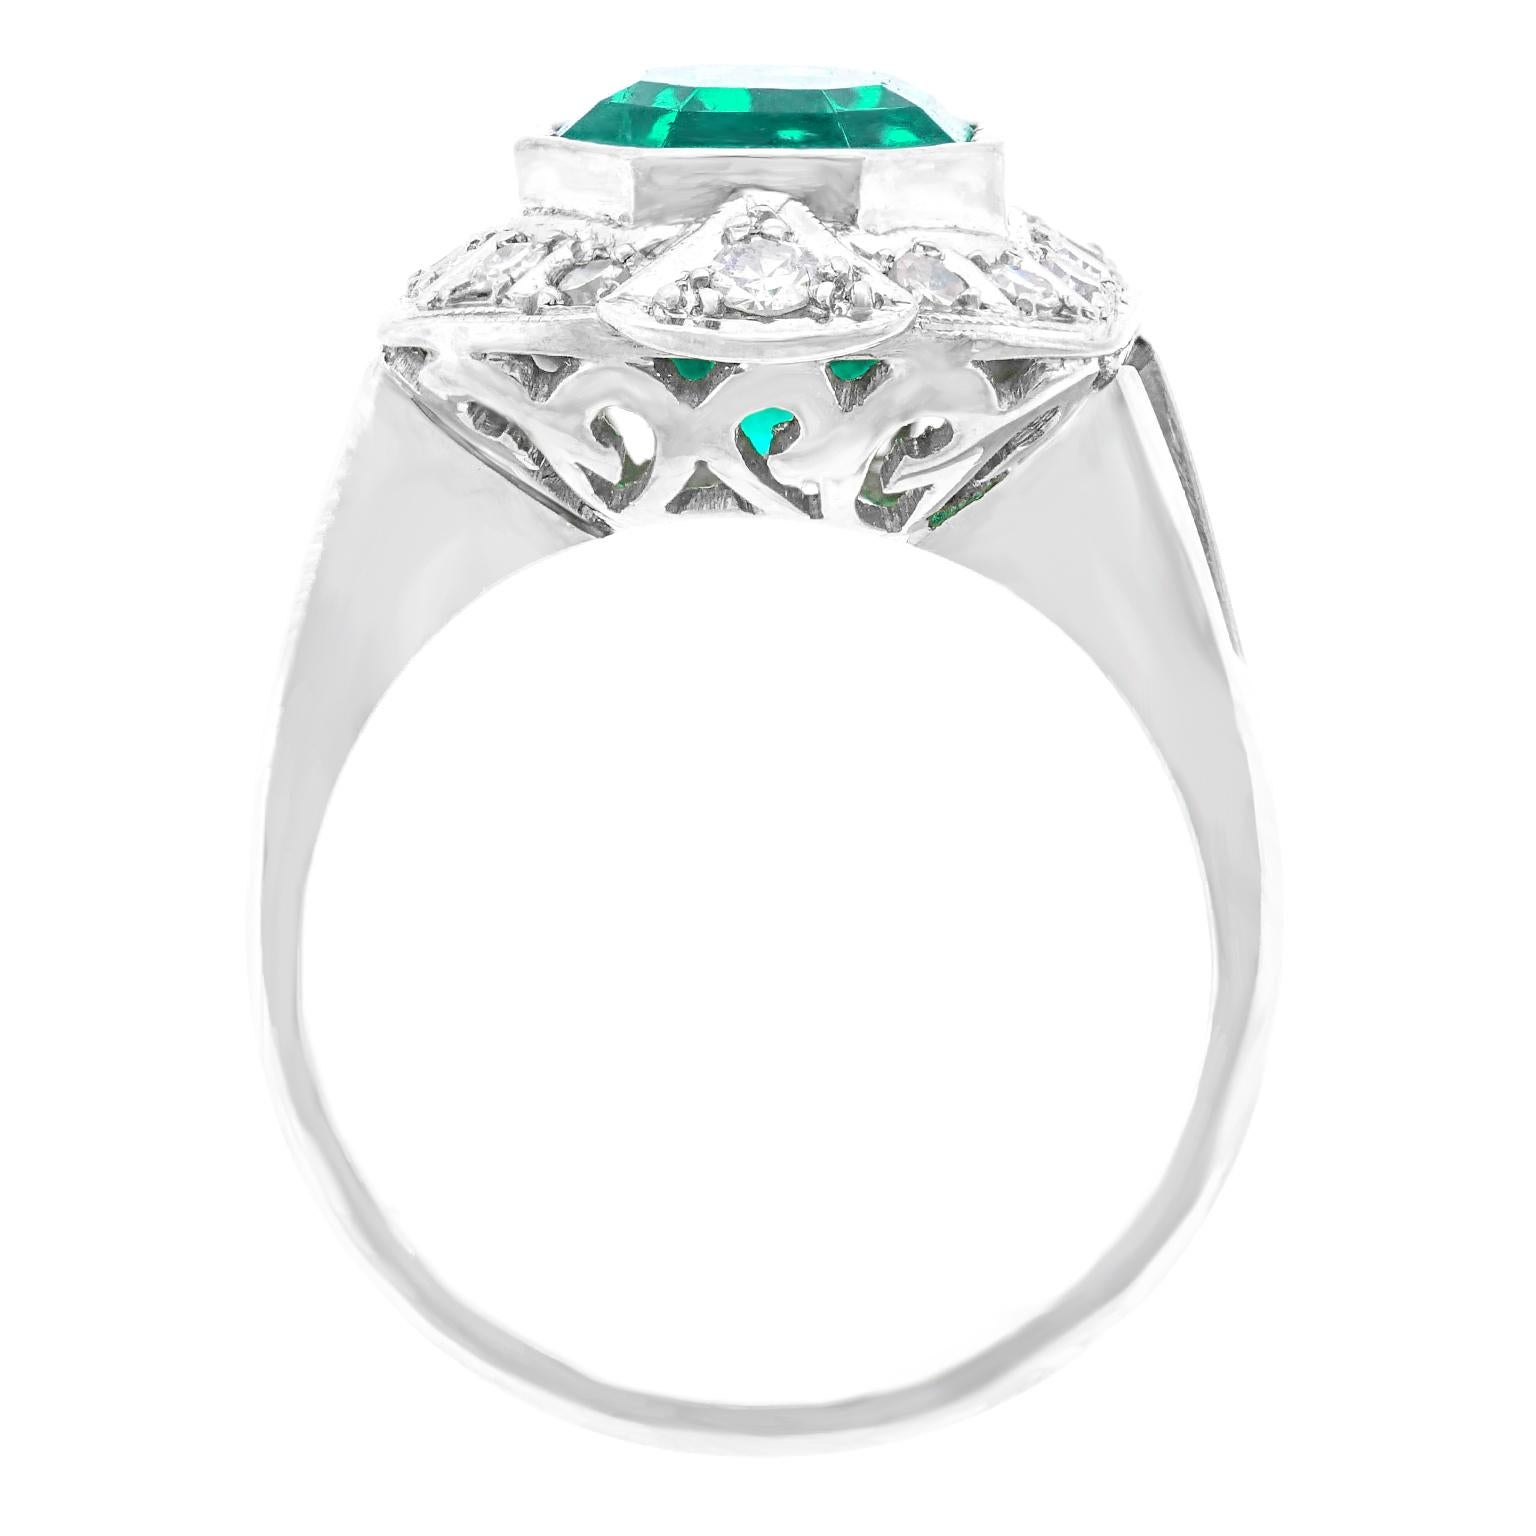 4.50 Carat Colombian Emerald and Diamond Art Deco Ring, GIA 5